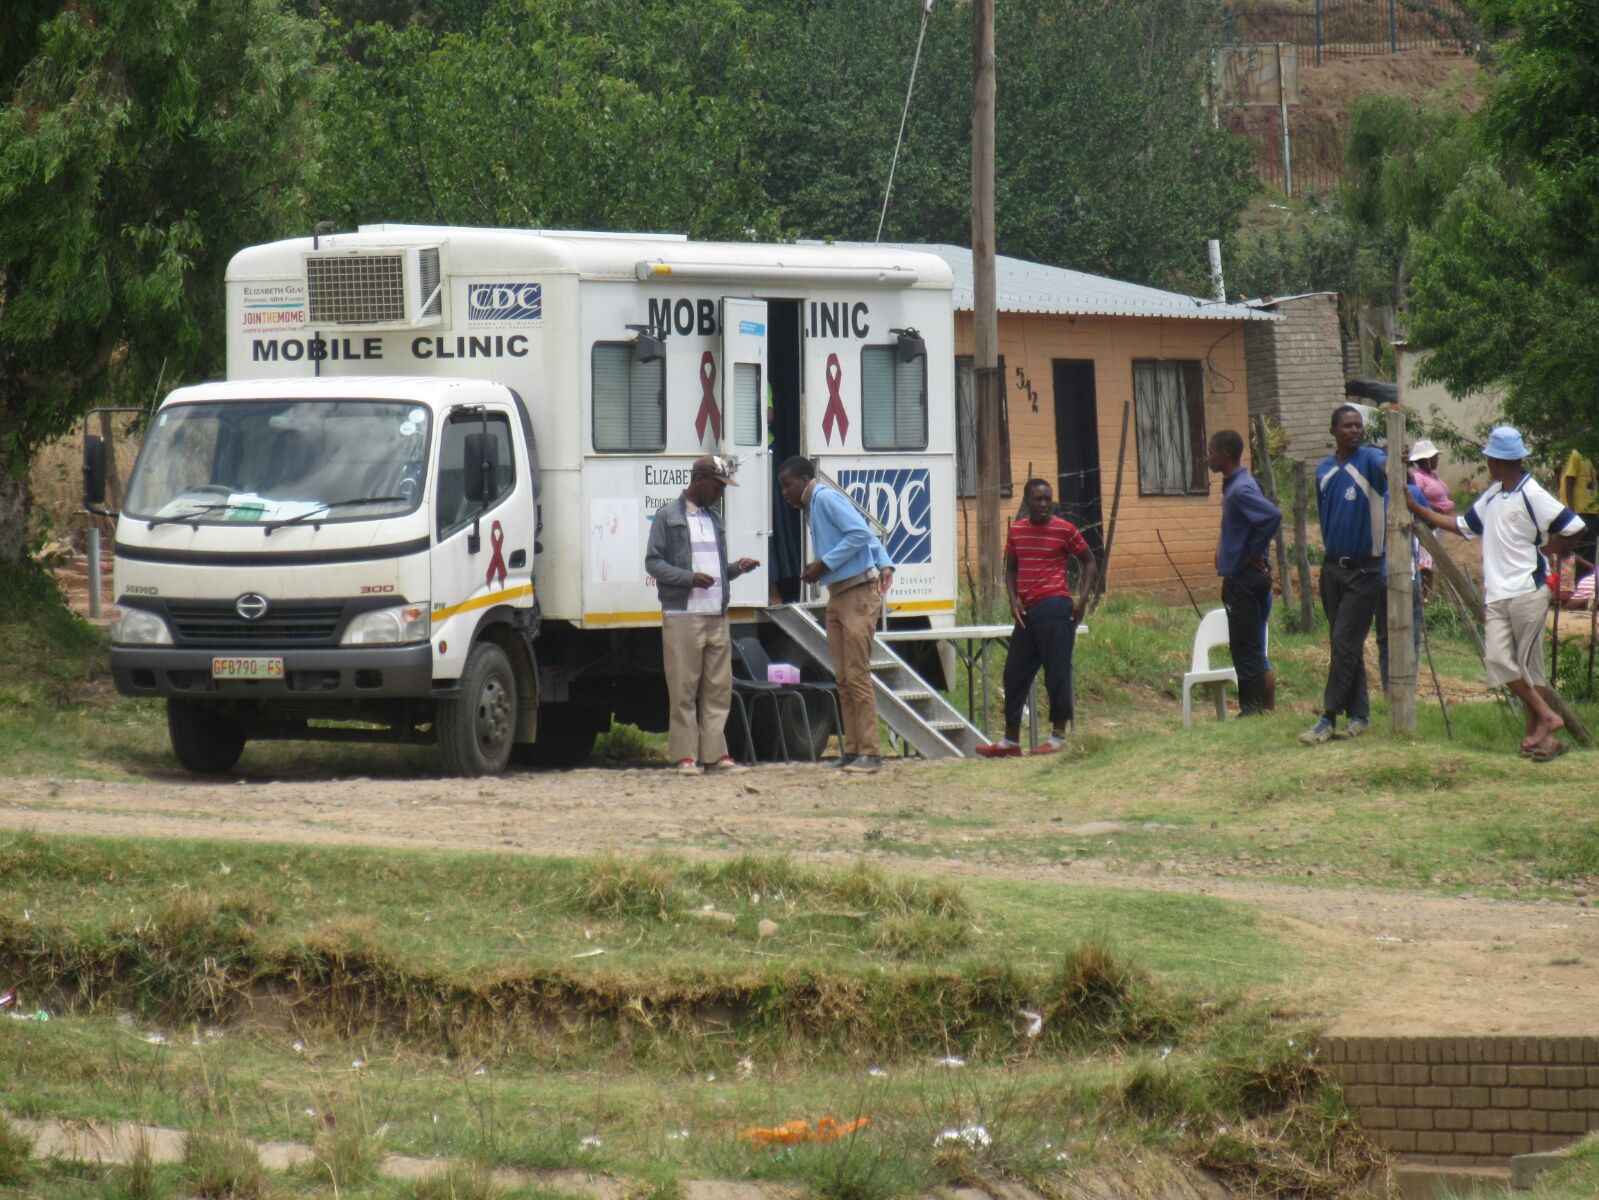 Mobile clinic as people get tested